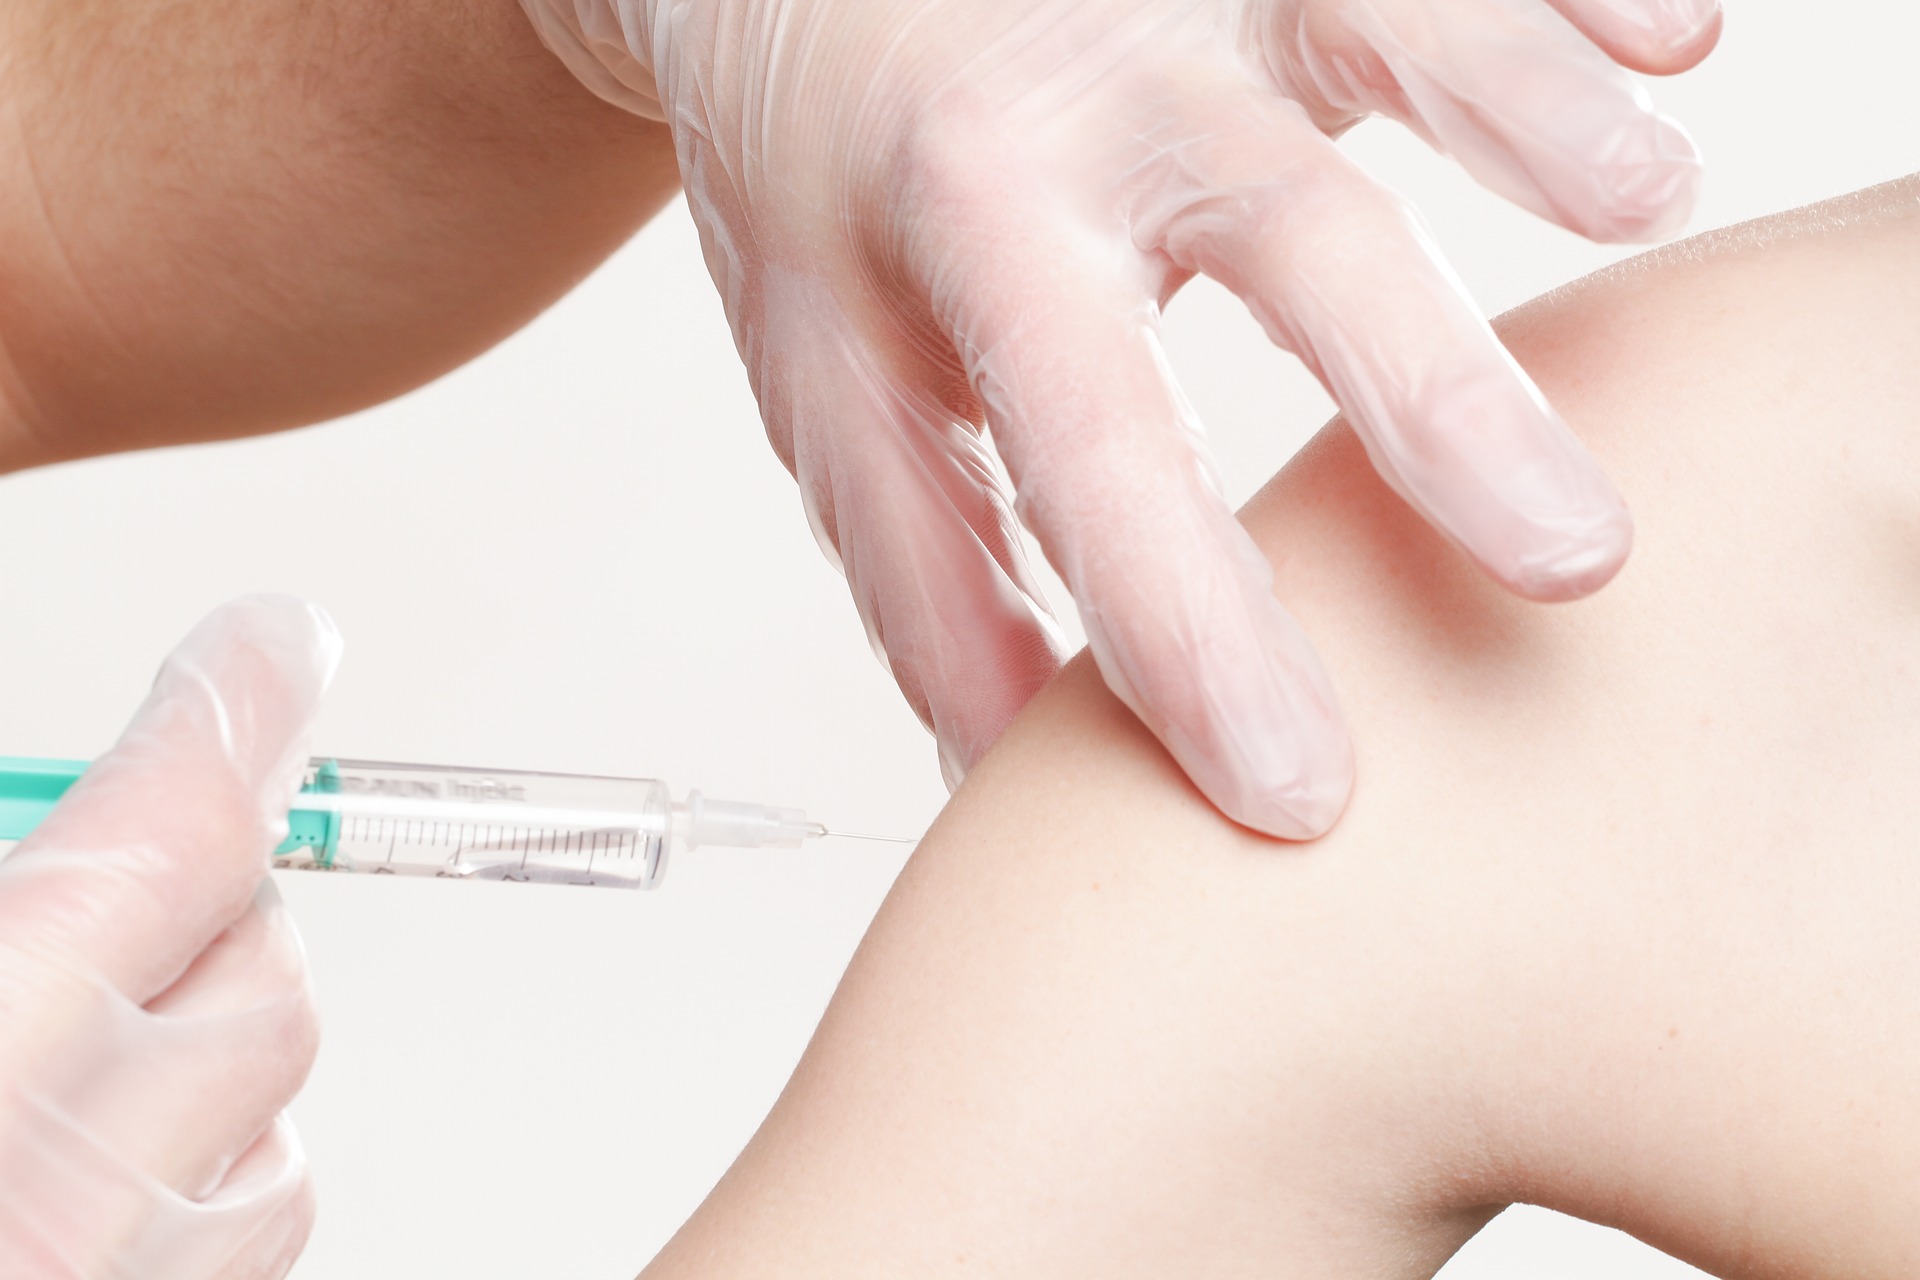 U.S. health agency reiterates that Covid vaccine booster not necessary